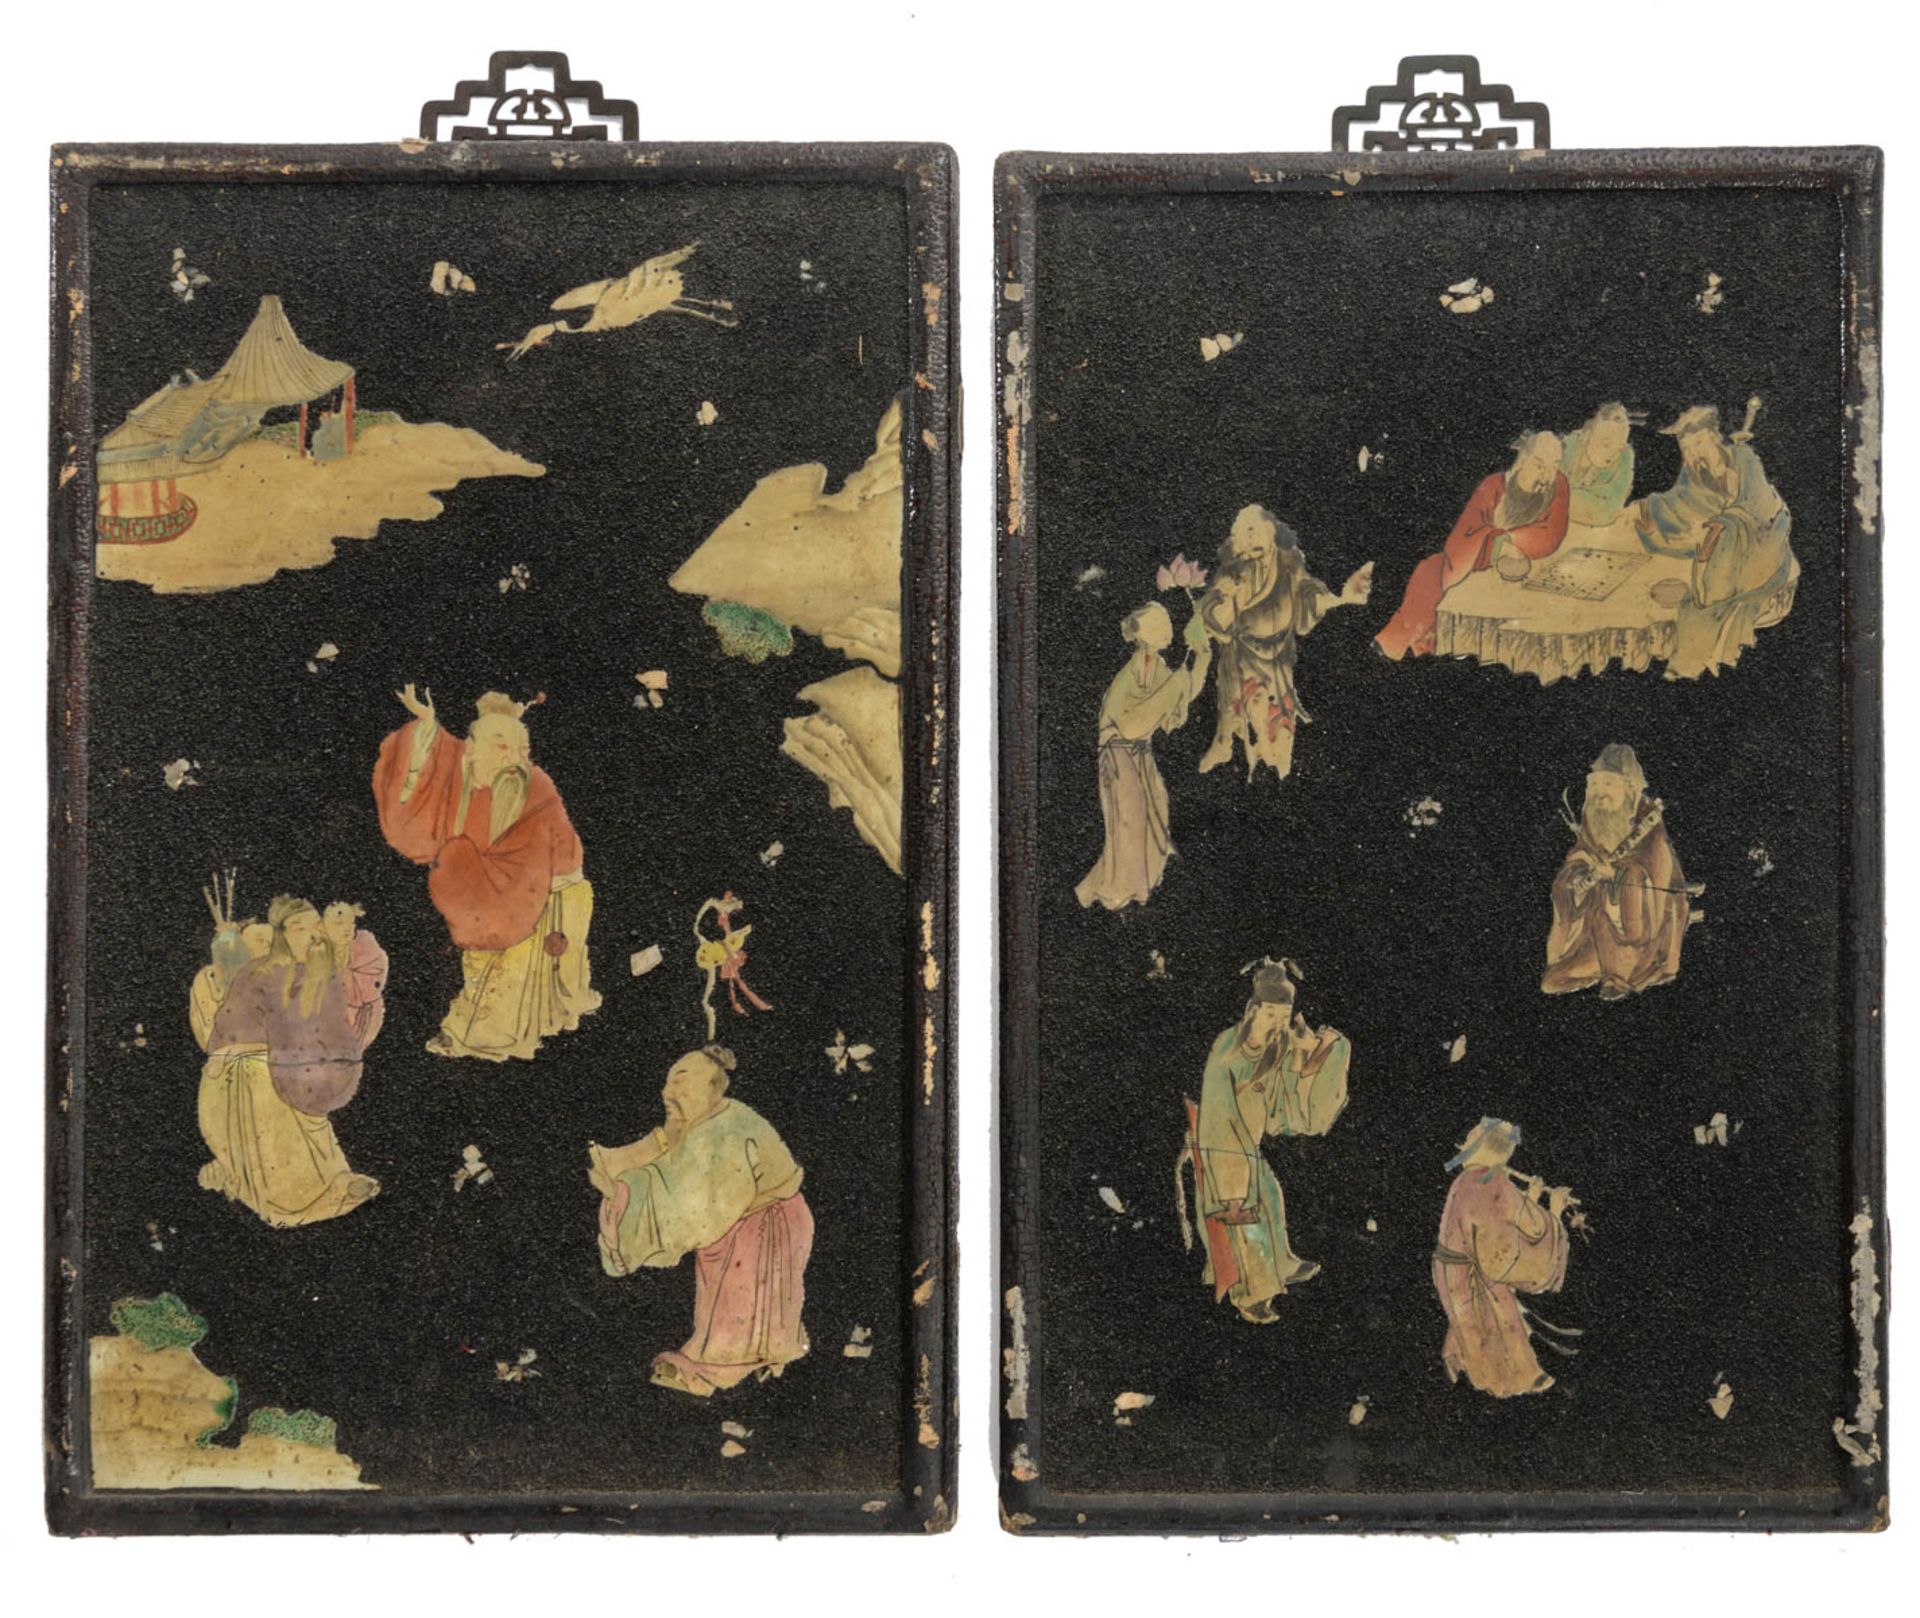 Two wall panels decorated with translucent lacquer set on a painted garden scene